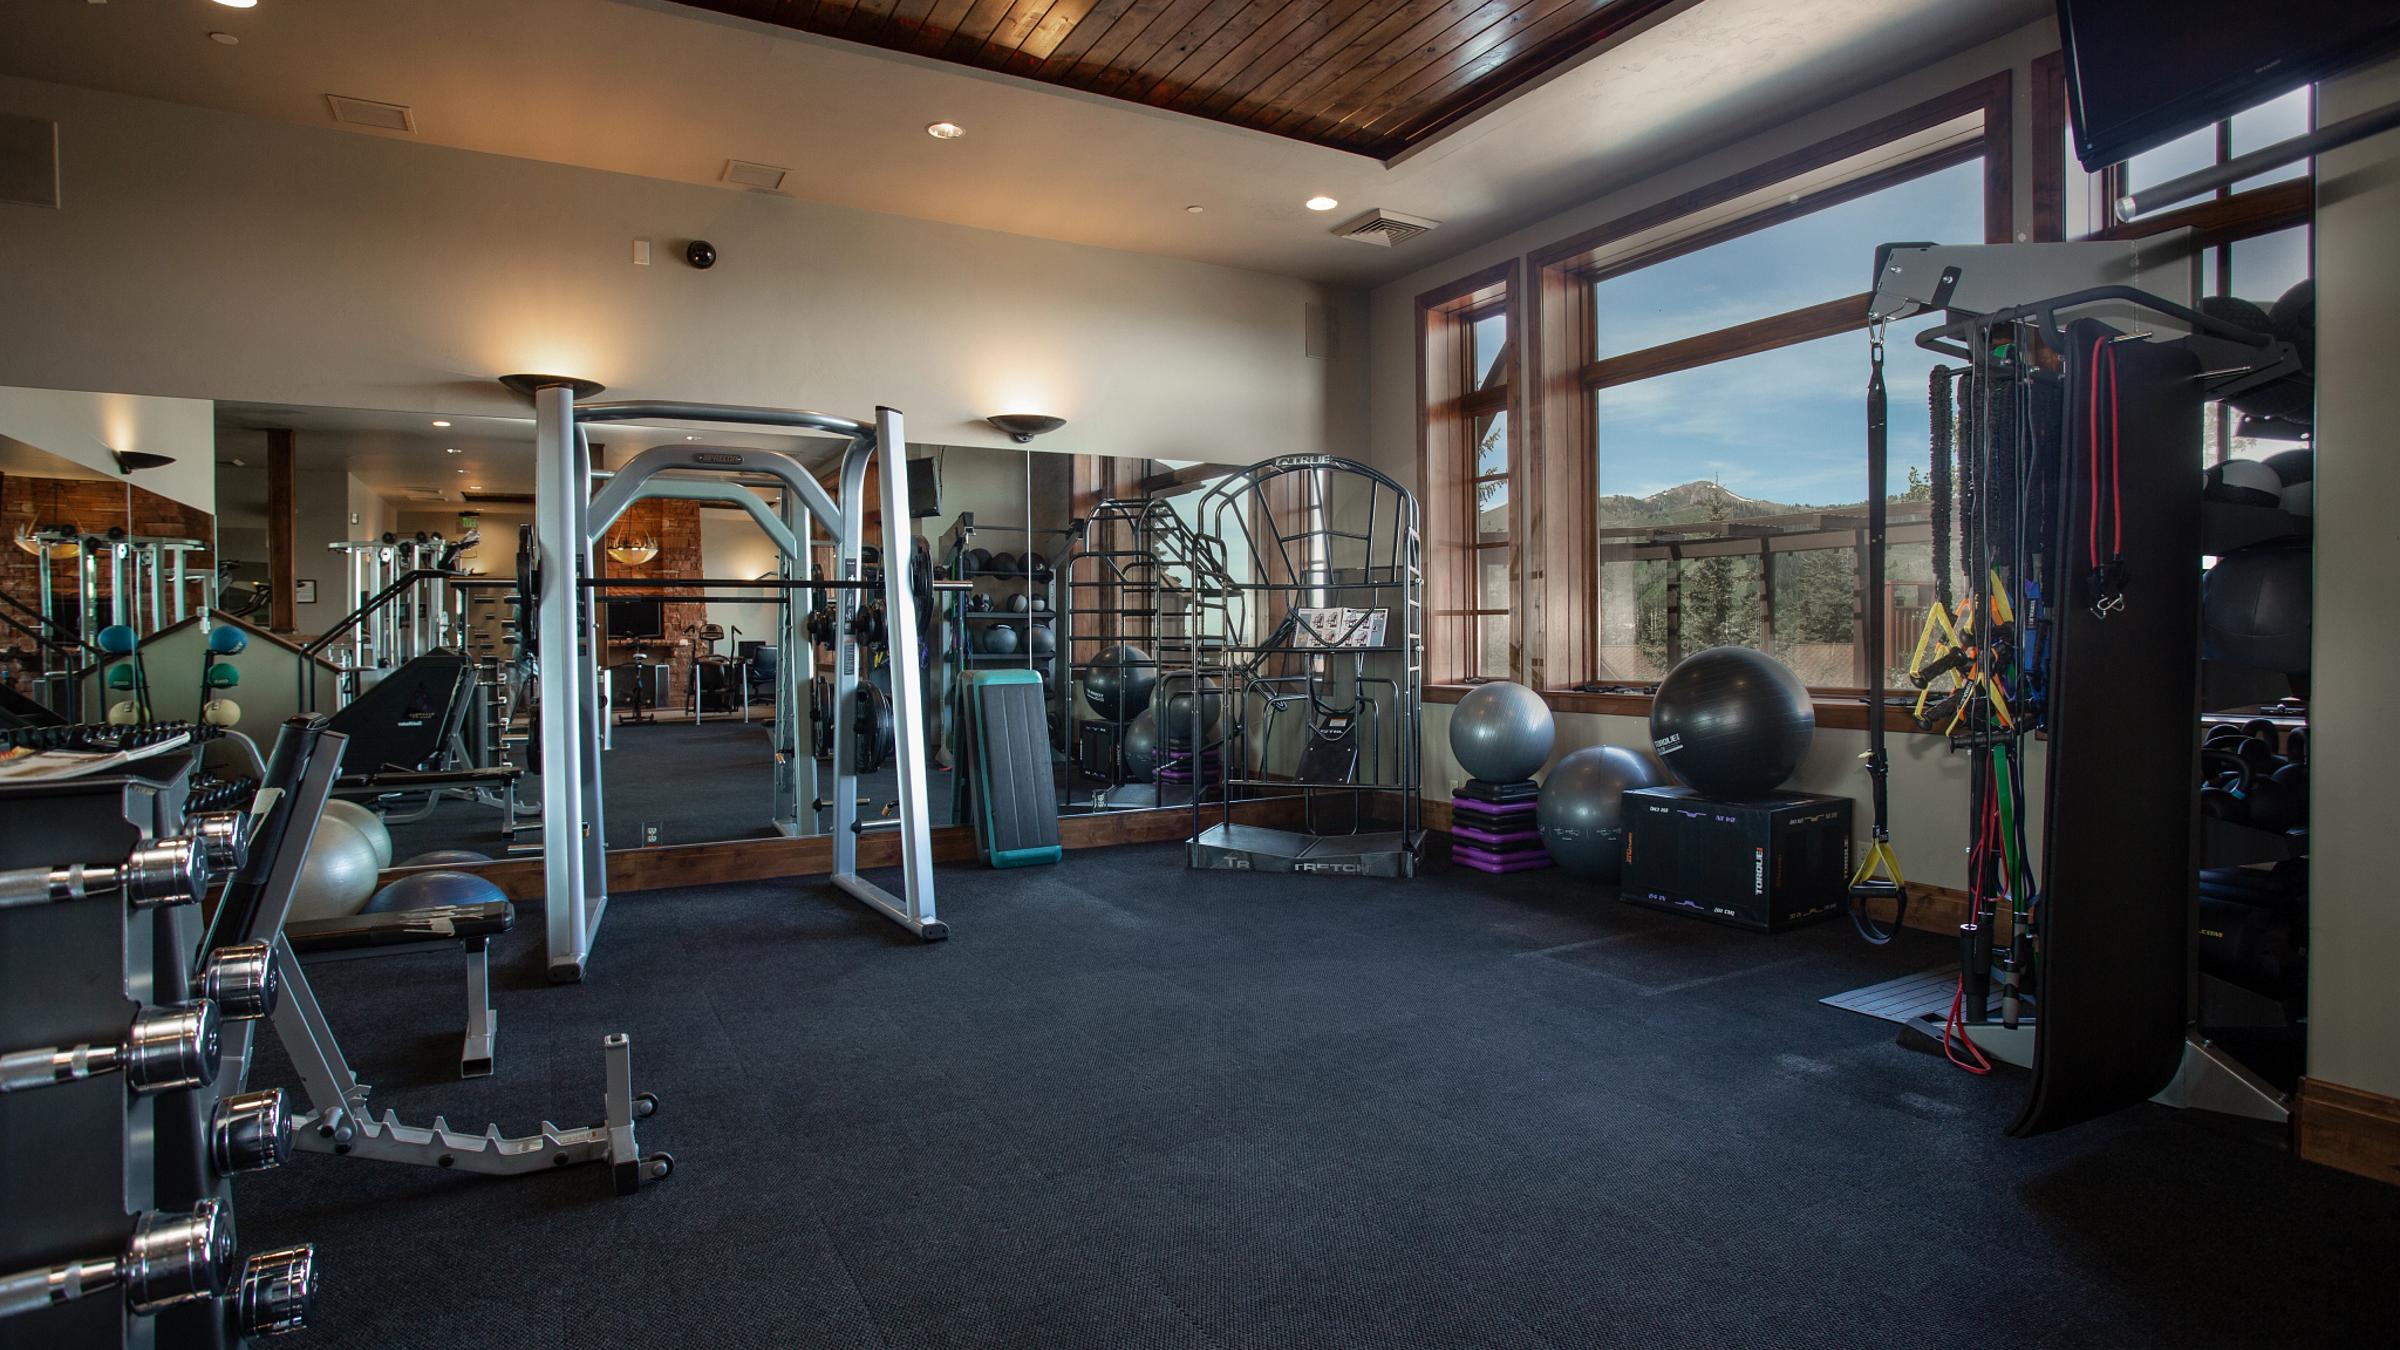 Stag Lodge gym area